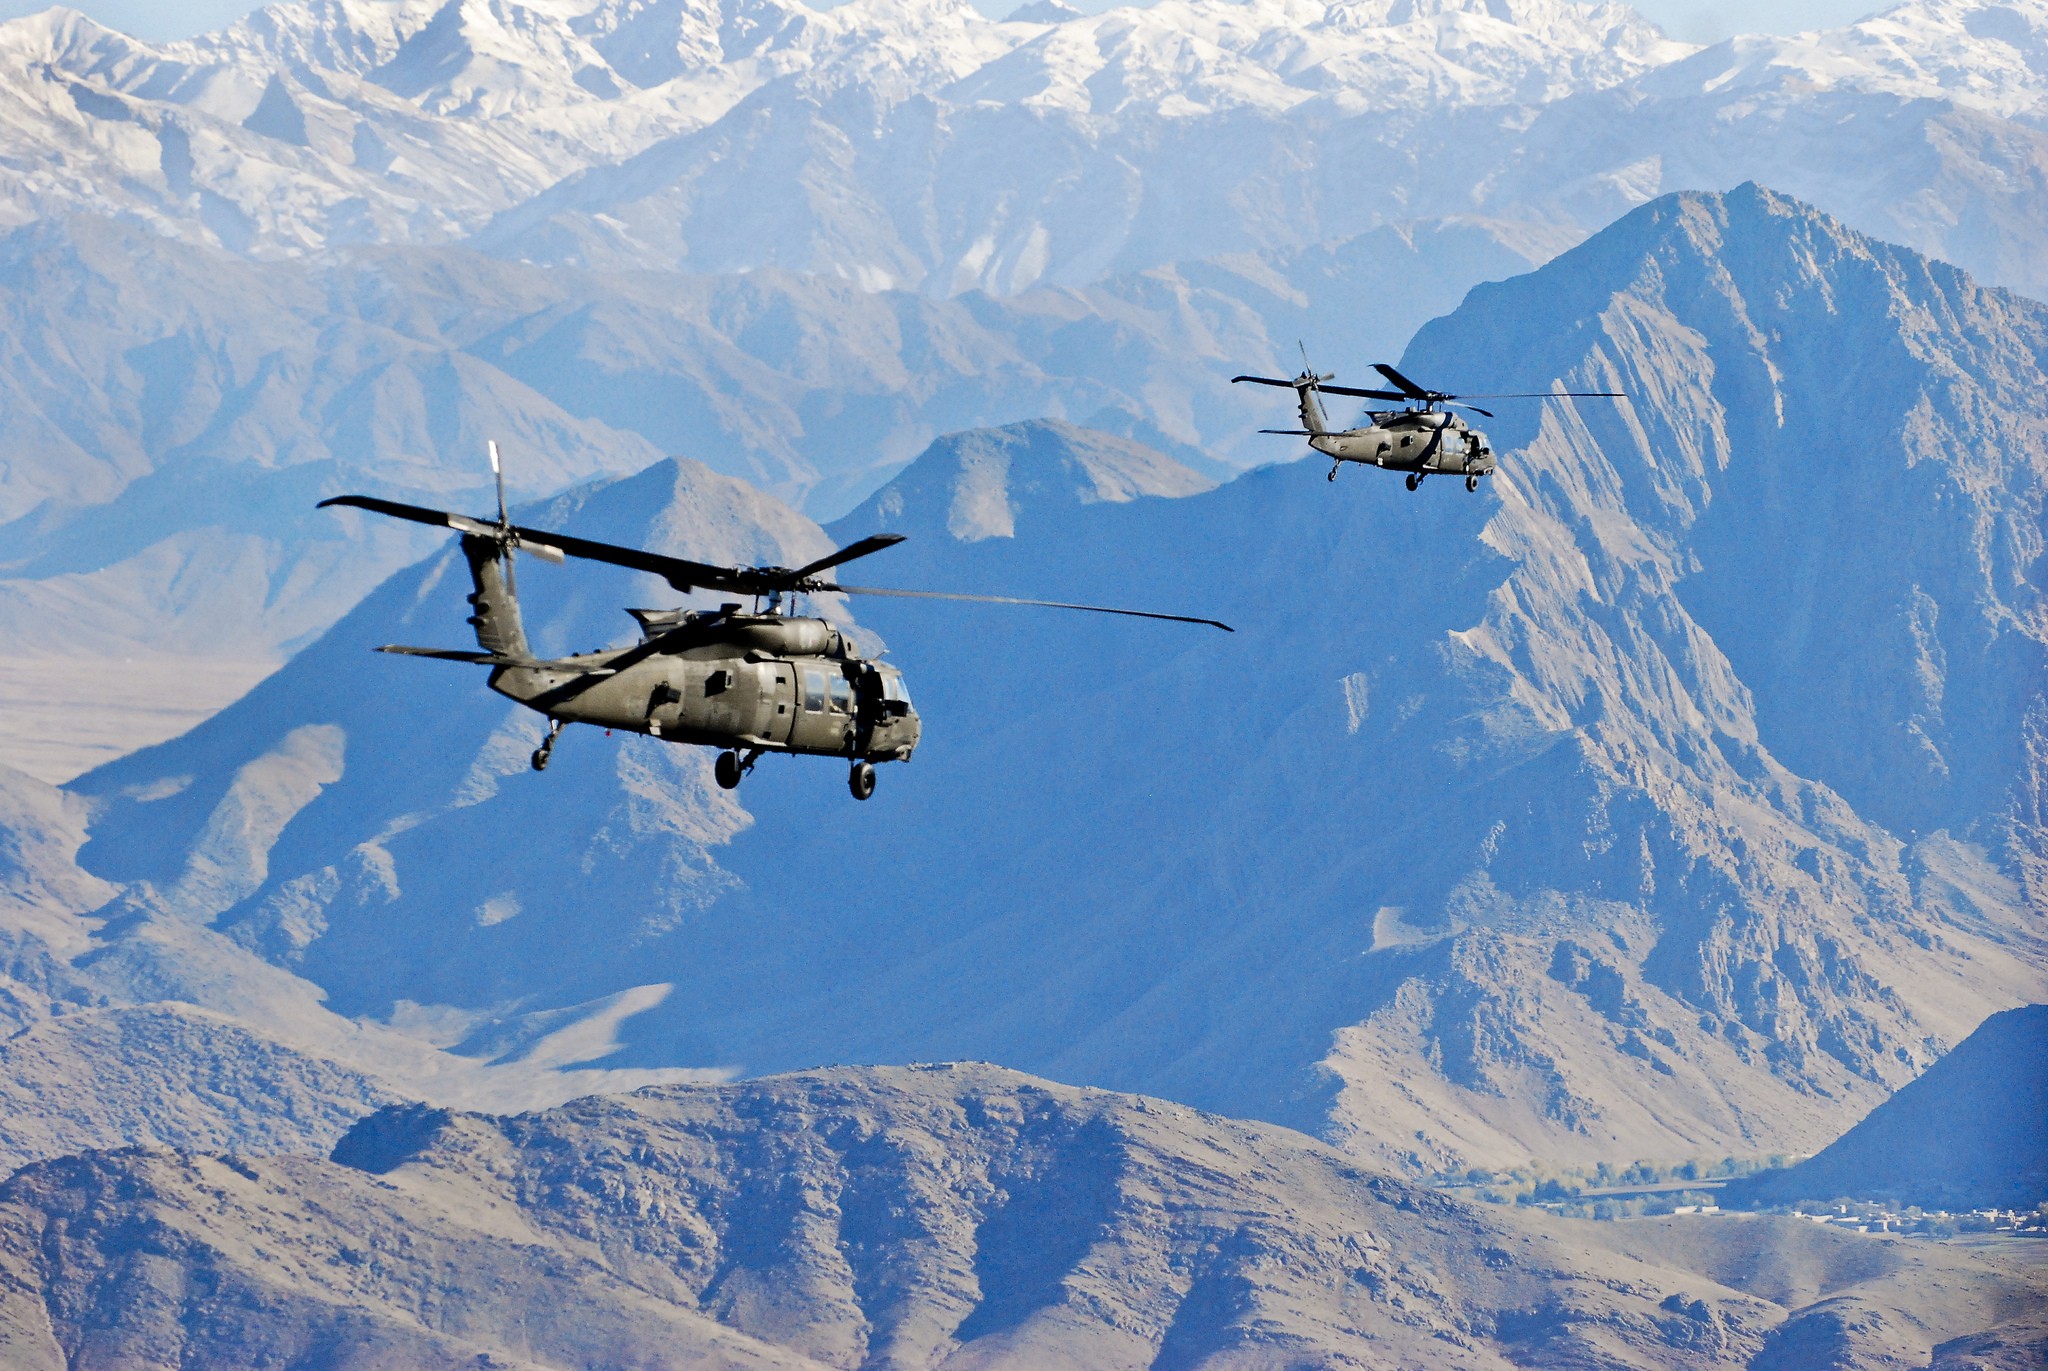 General 2048x1371 USA military aircraft Sikorsky UH-60 Black Hawk vehicle military vehicle landscape mountains American aircraft military helicopters